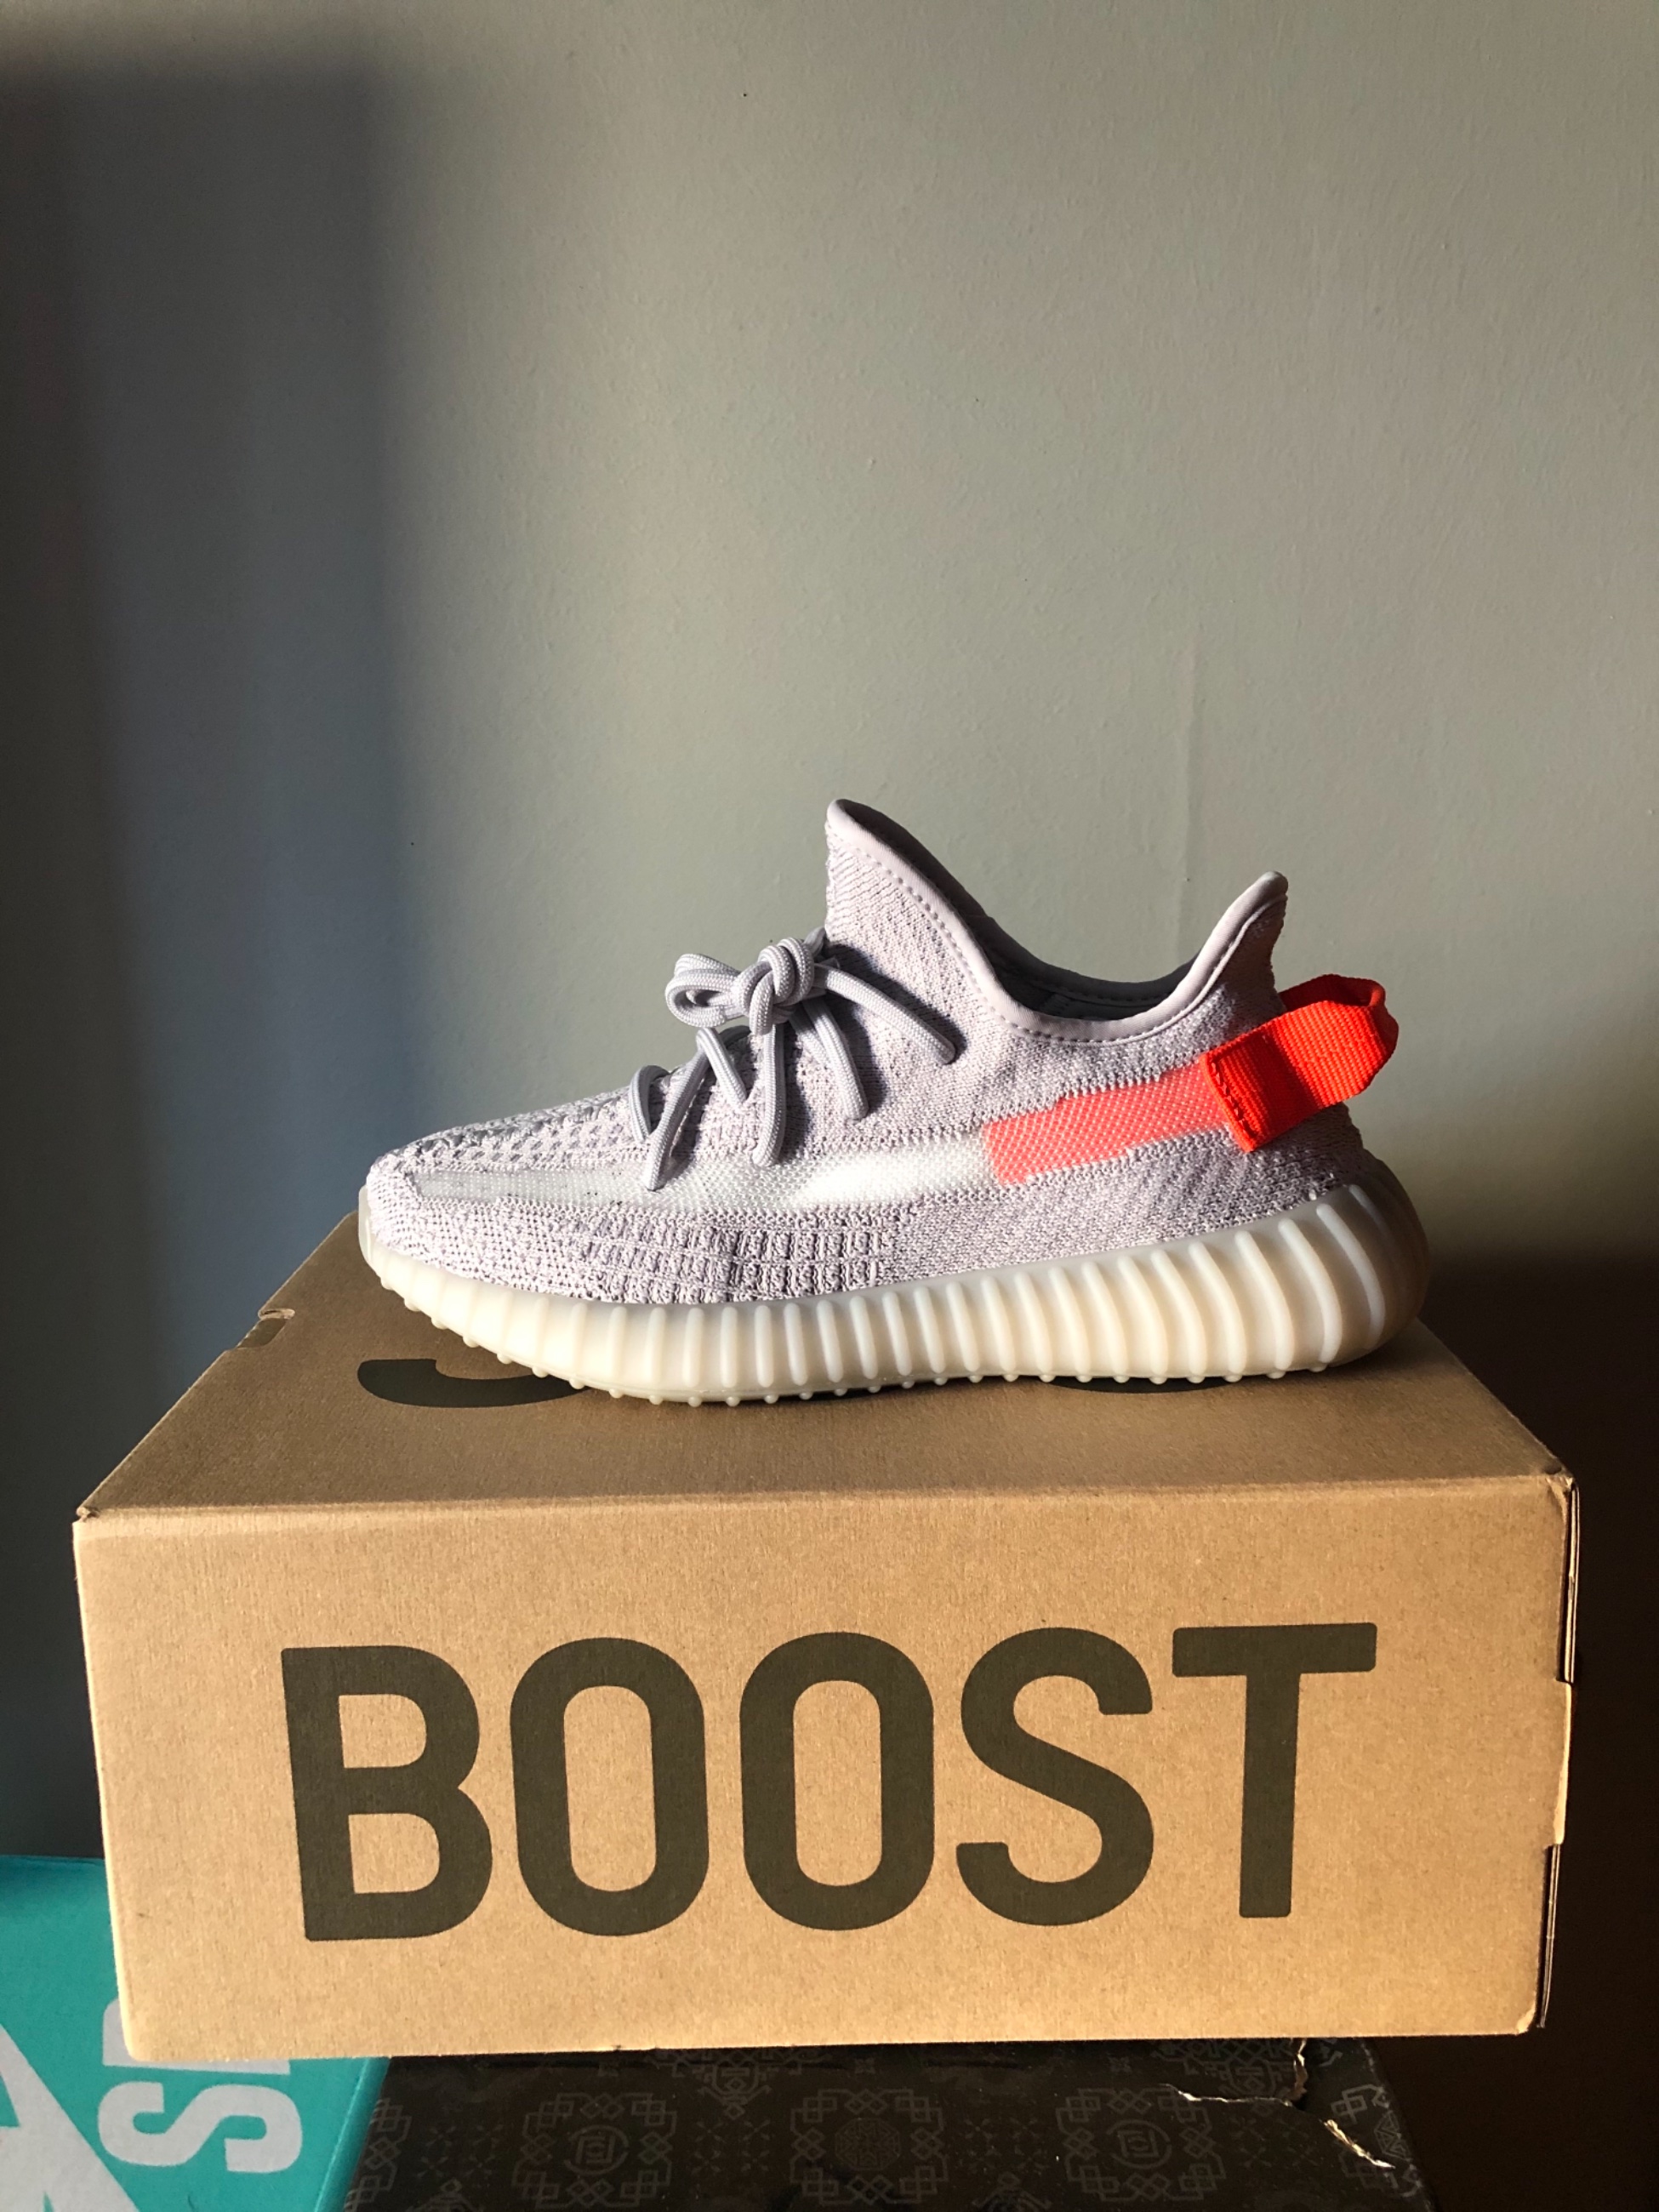 Cheap Authentic Ad Yeezy 350 Boost V2 Cream White